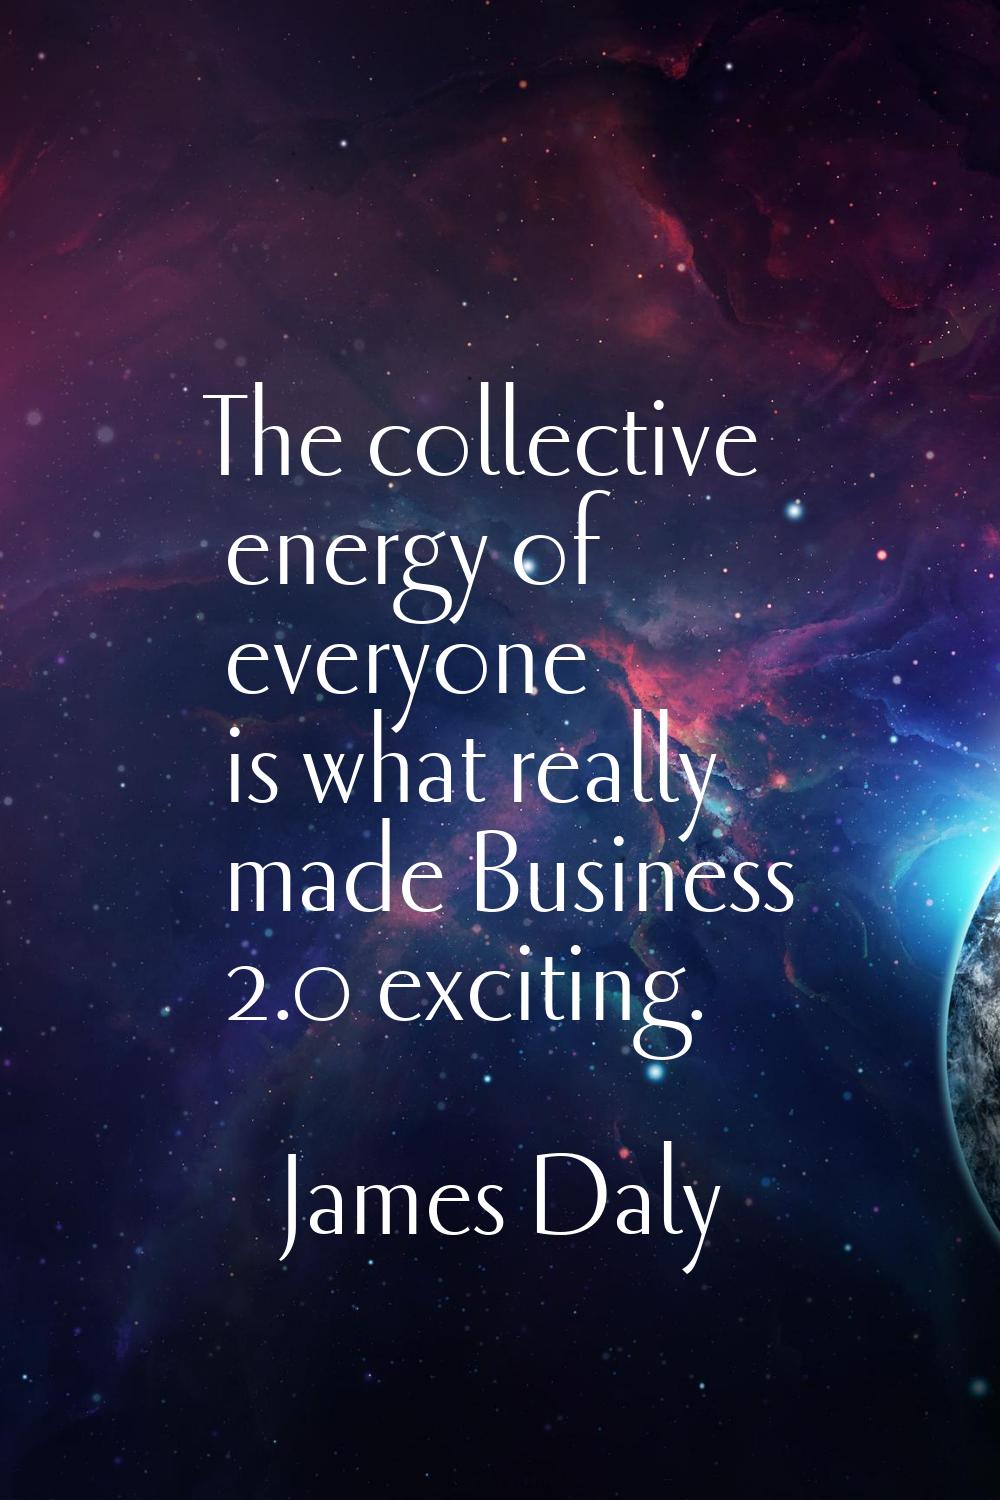 The collective energy of everyone is what really made Business 2.0 exciting.